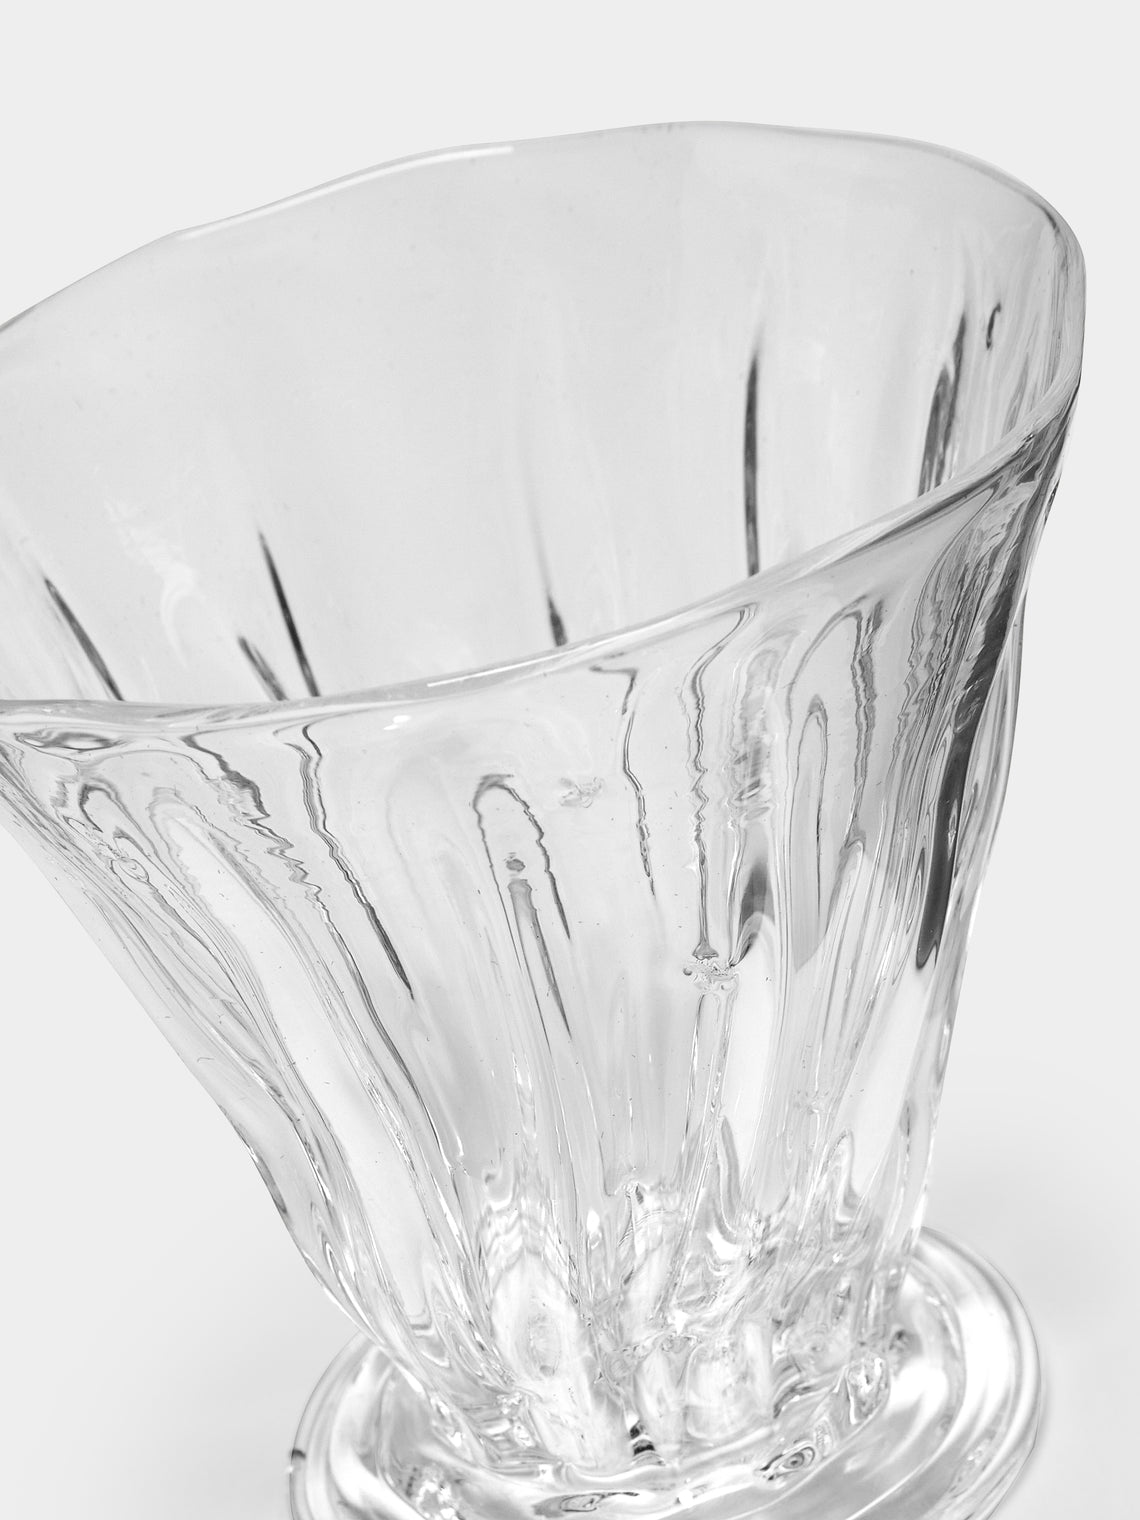 Alexander Kirkeby - Hand-Blown Crystal Small Tumblers (Set of 2) -  - ABASK